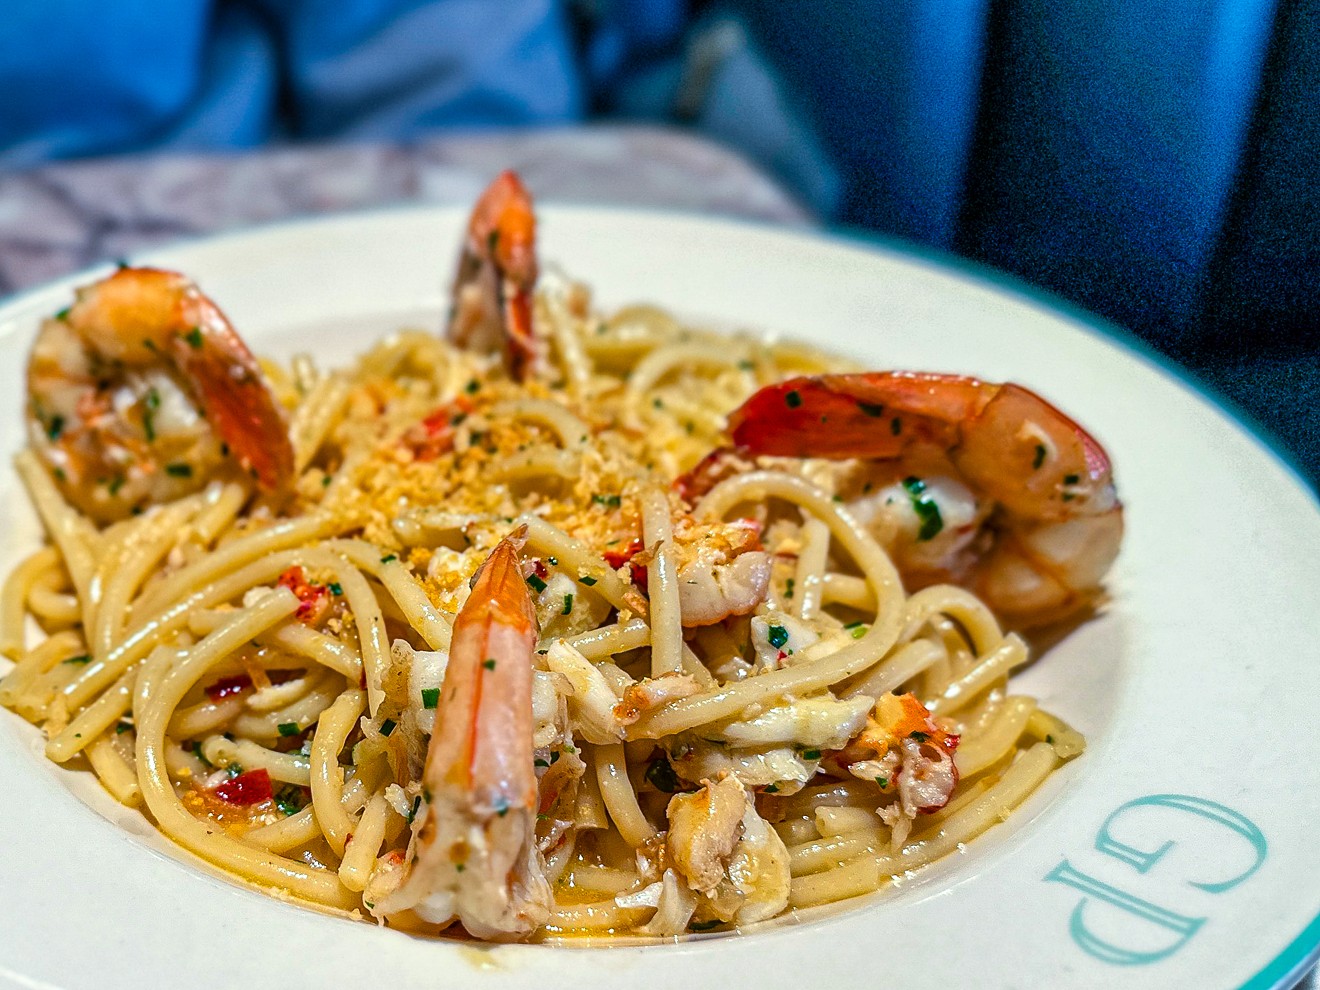 The seafood pasta is one of the standout dishes at Green Point Seafood & Oyster Bar.